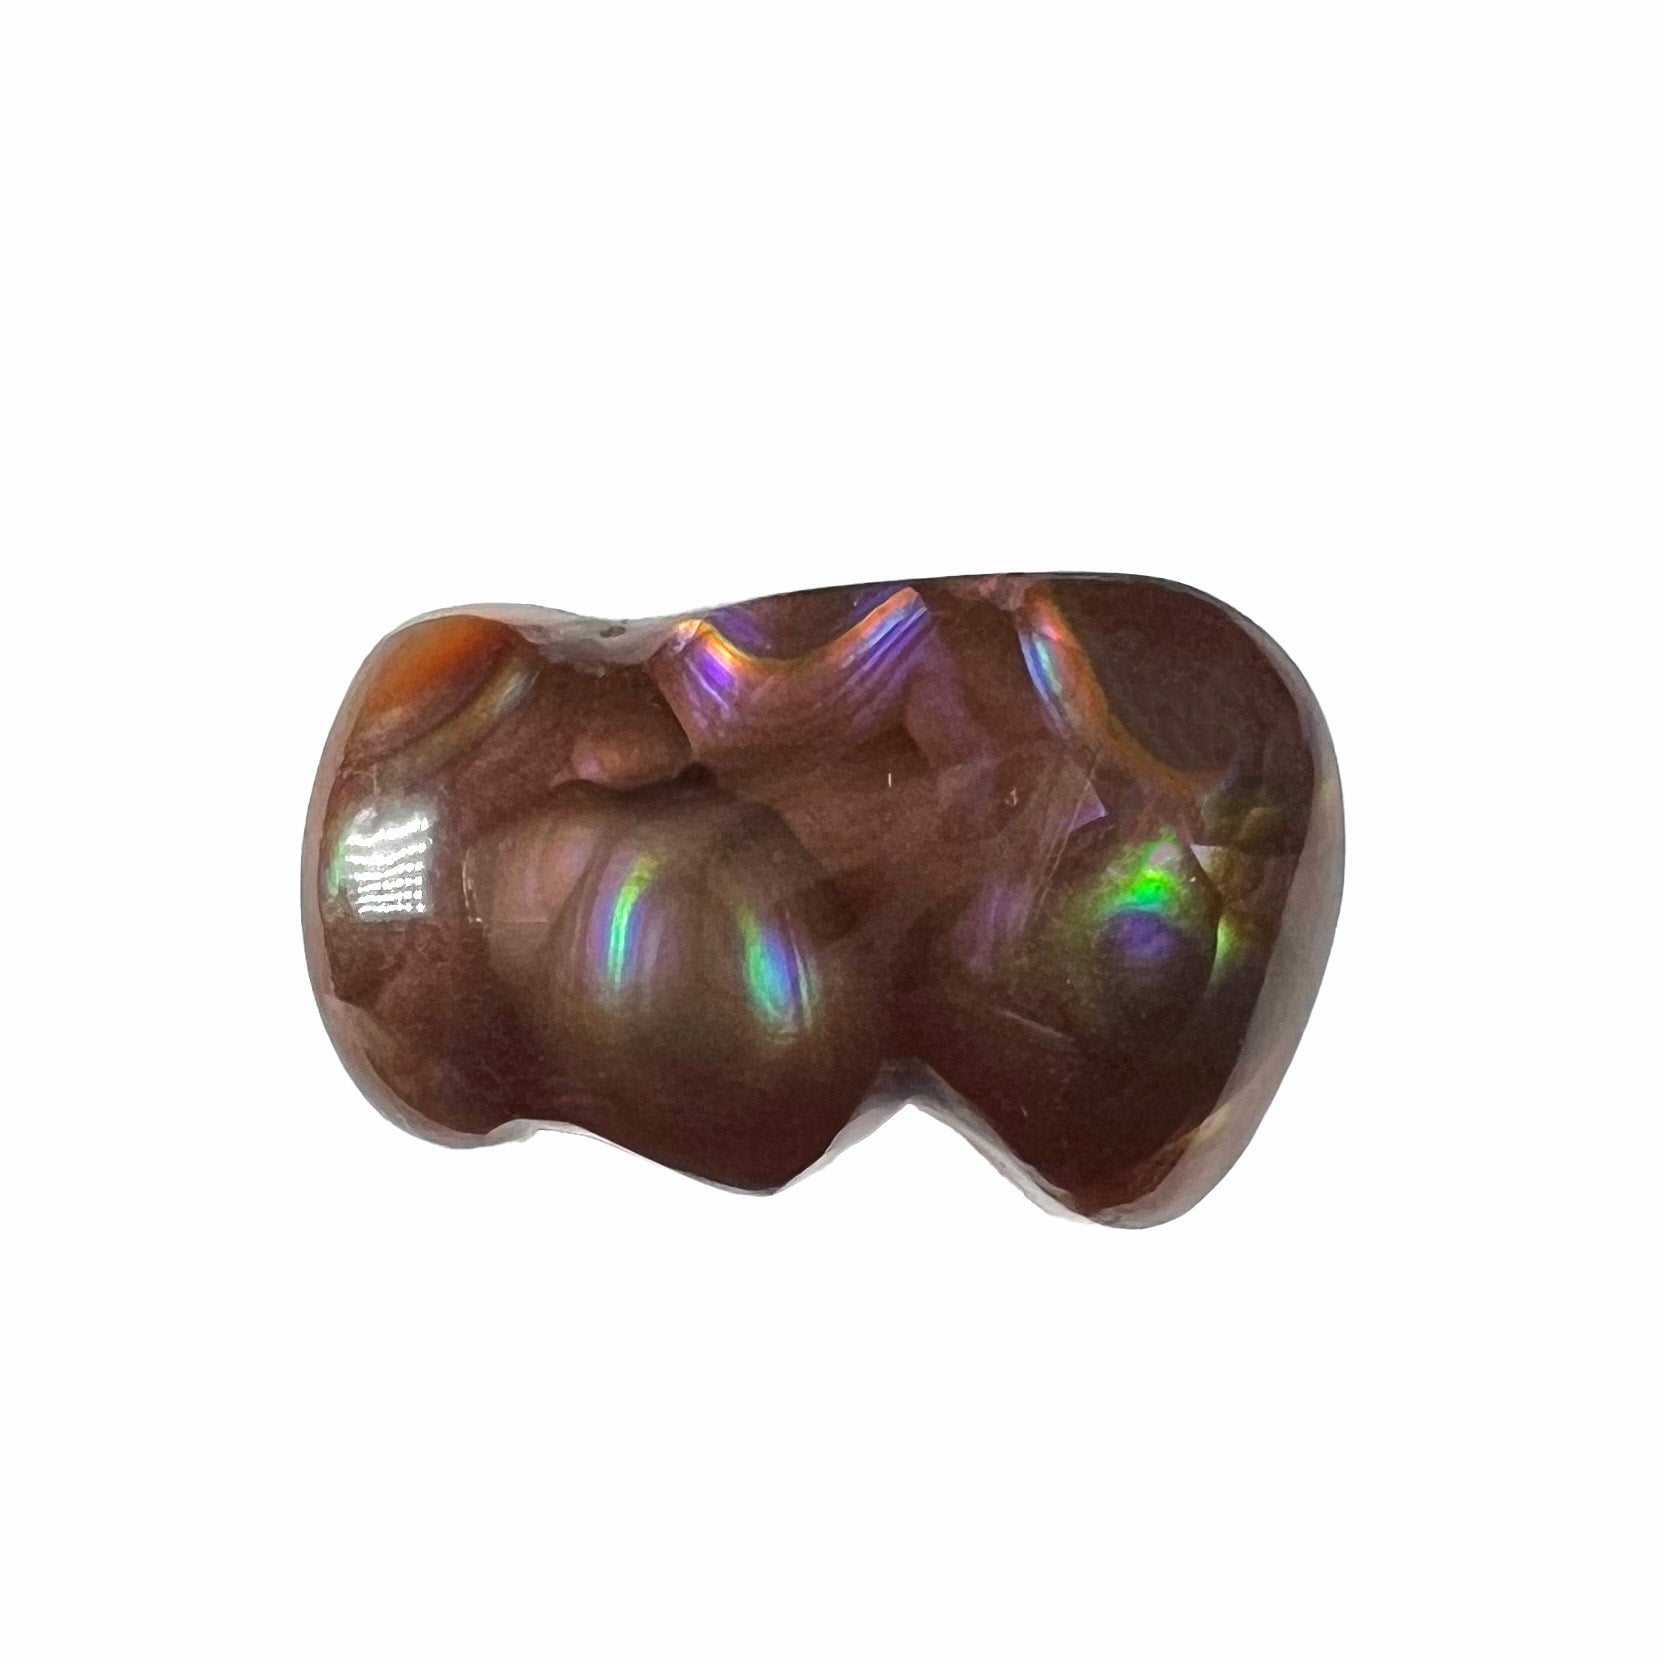 A polished, freeform shaped fire agate stone.  The stone is purple, green, and blue with red and yellow banding.